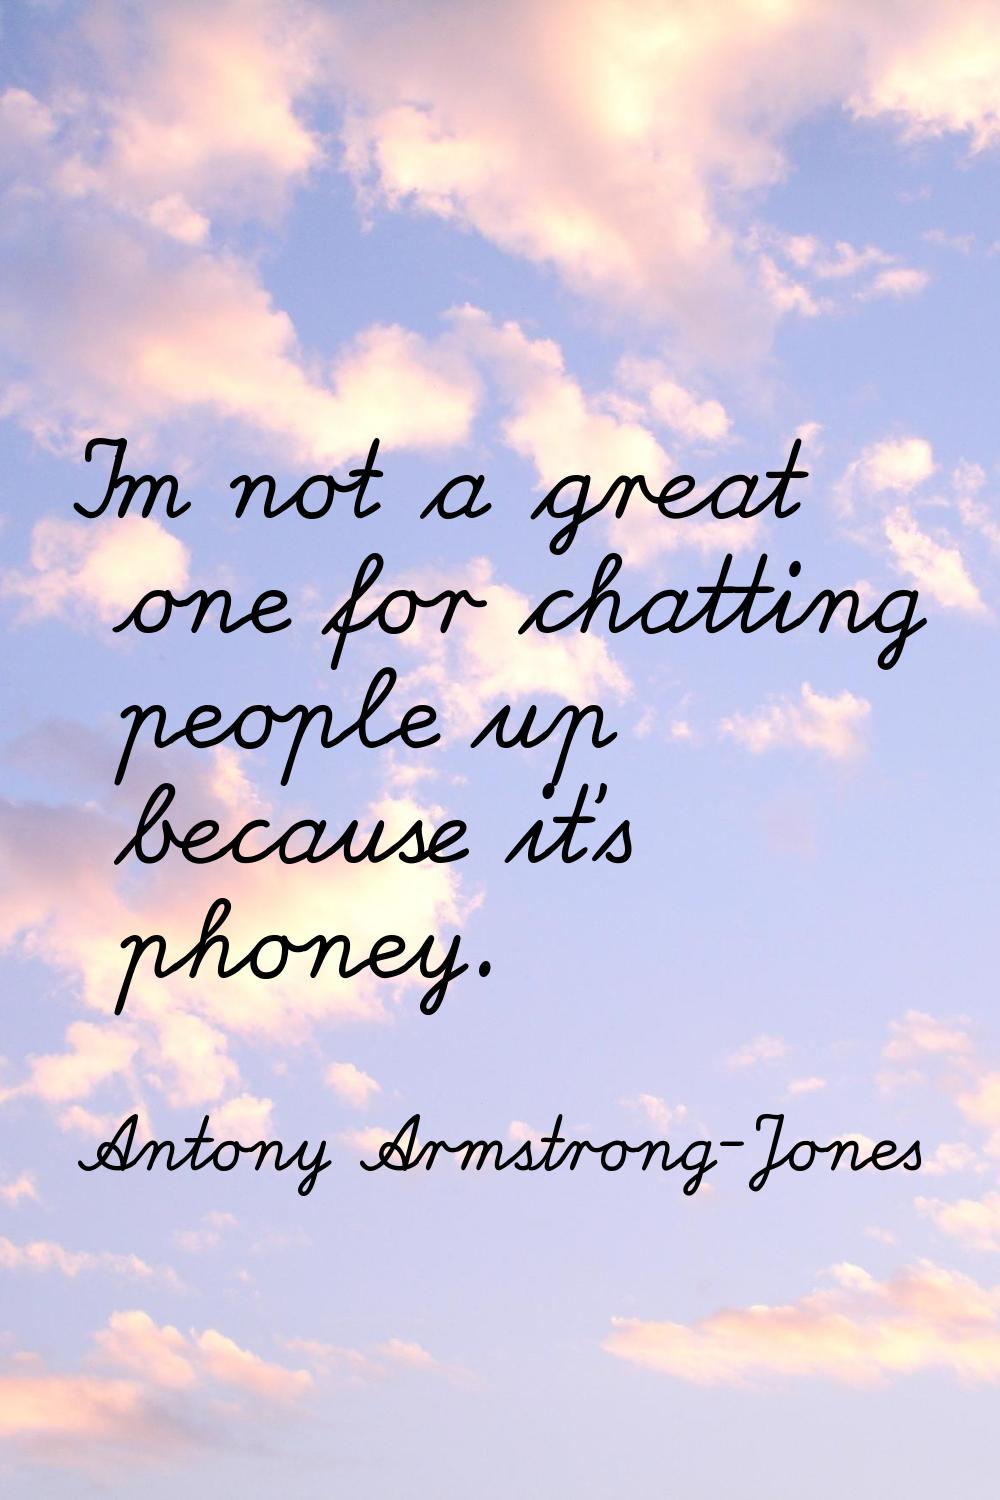 I'm not a great one for chatting people up because it's phoney.